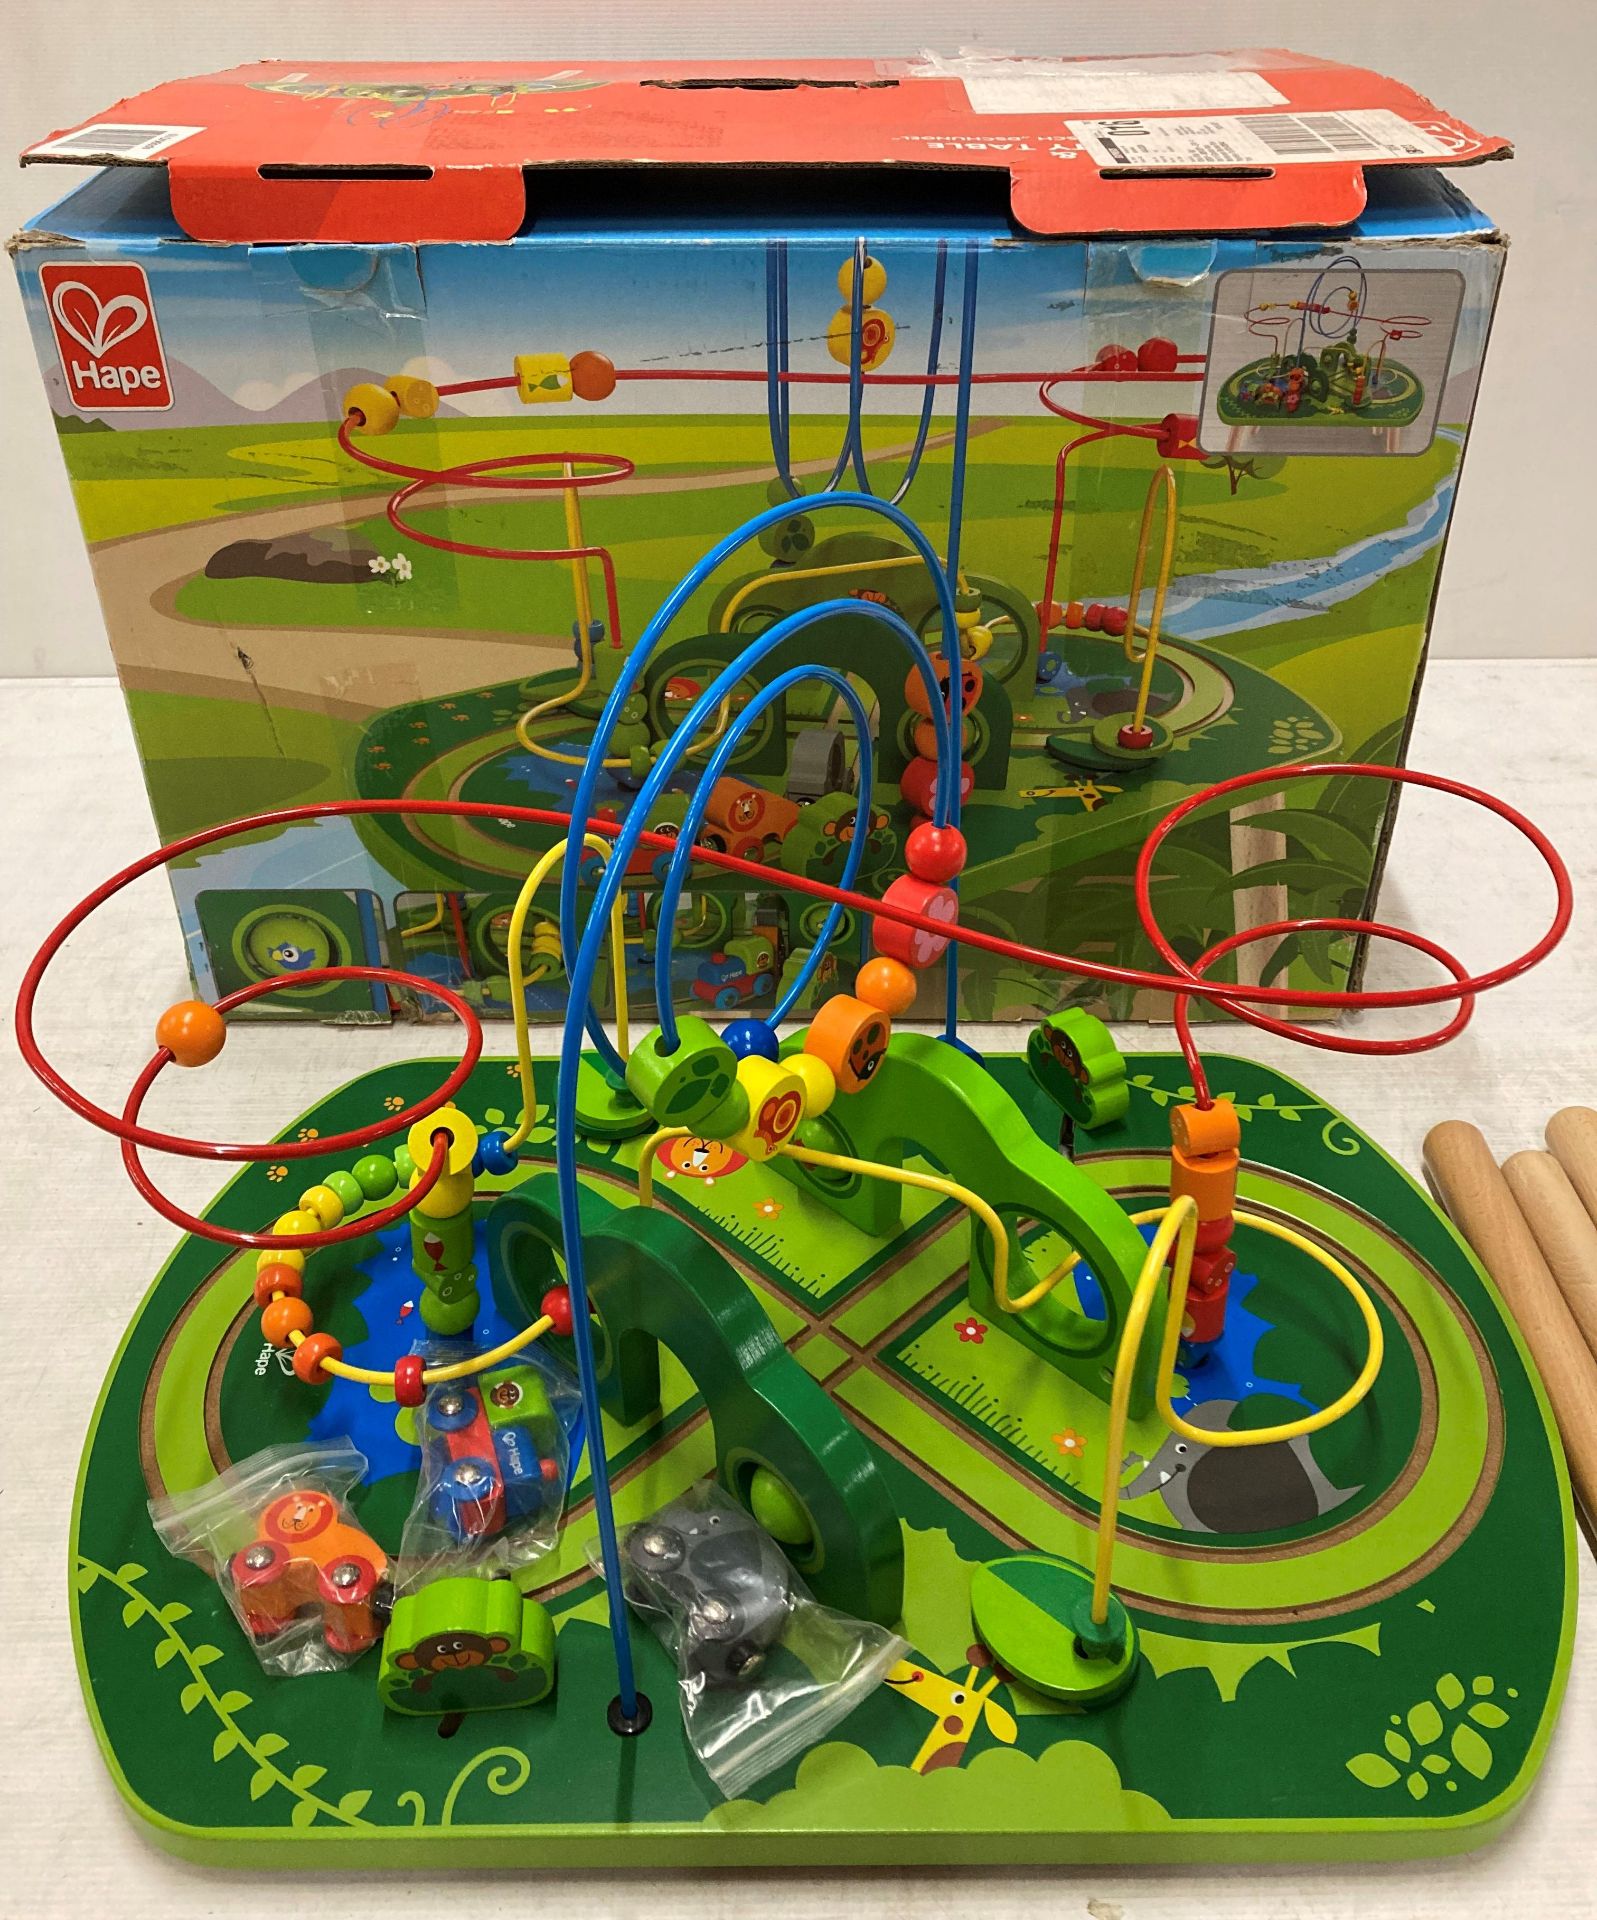 Hape Jungle Play & Train activity table set (boxed - sold as seen) (saleroom location: K05) - Image 2 of 2